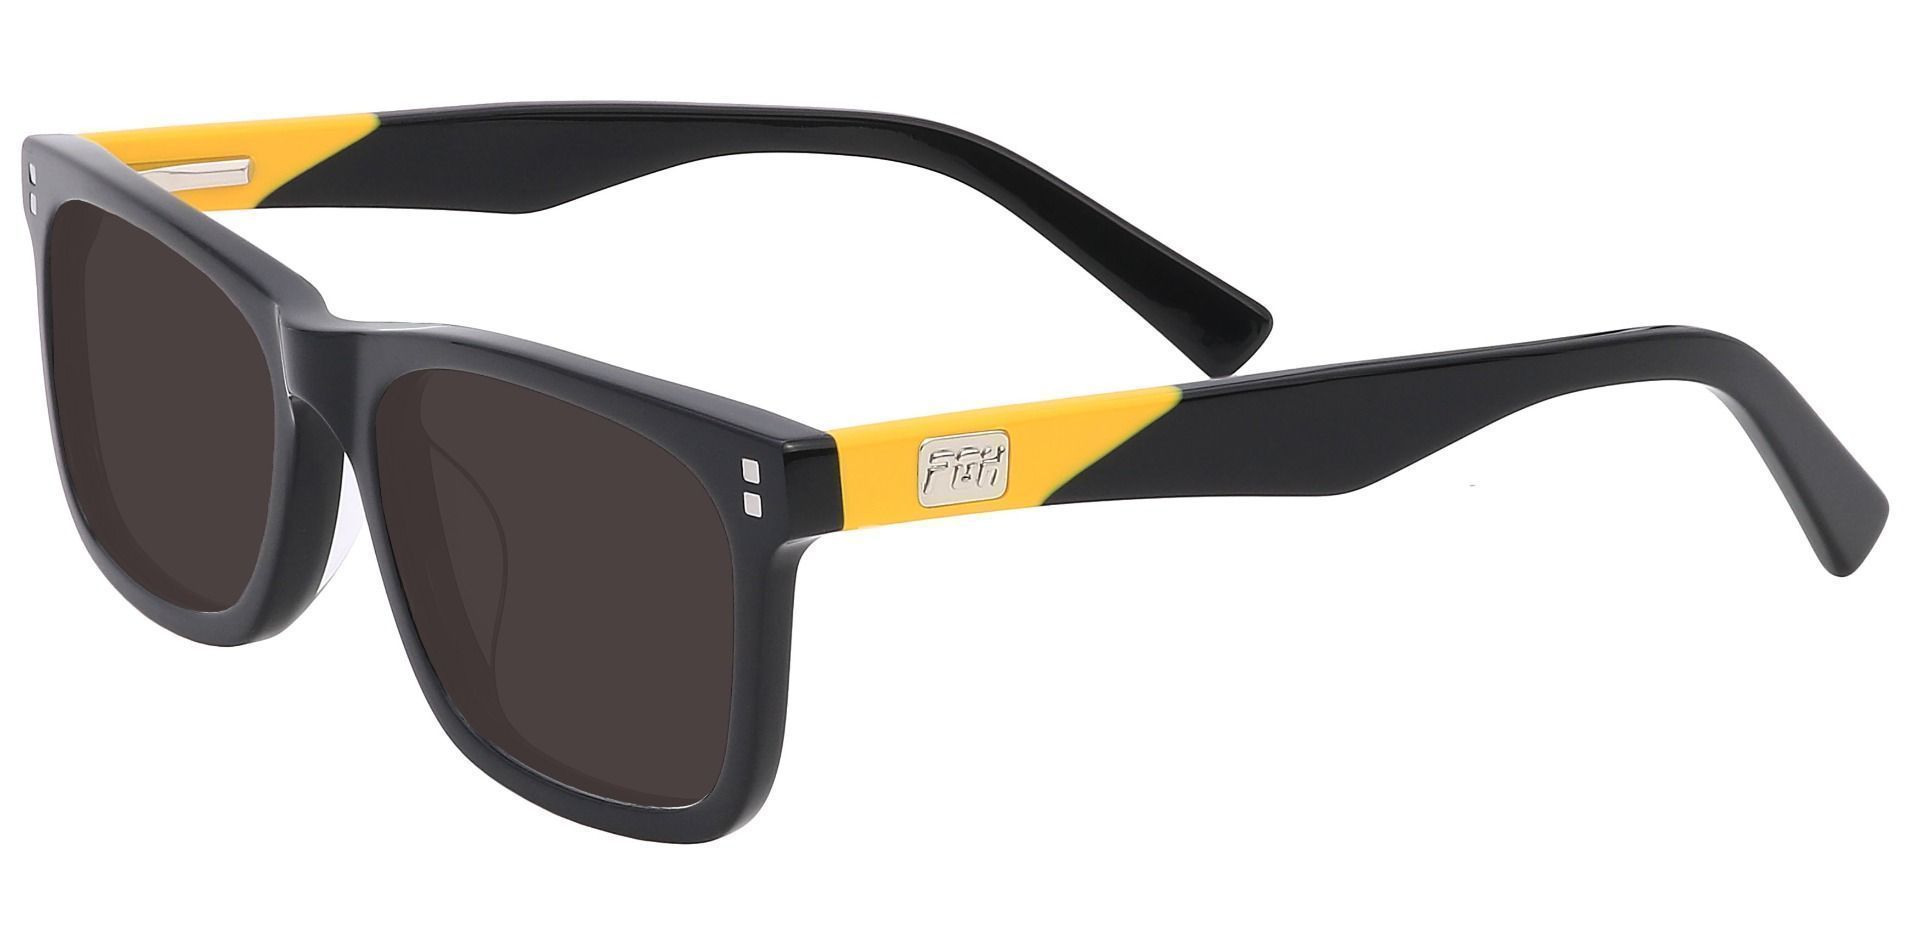 Liberty Rectangle Reading Sunglasses - Black Frame With Gray Lenses